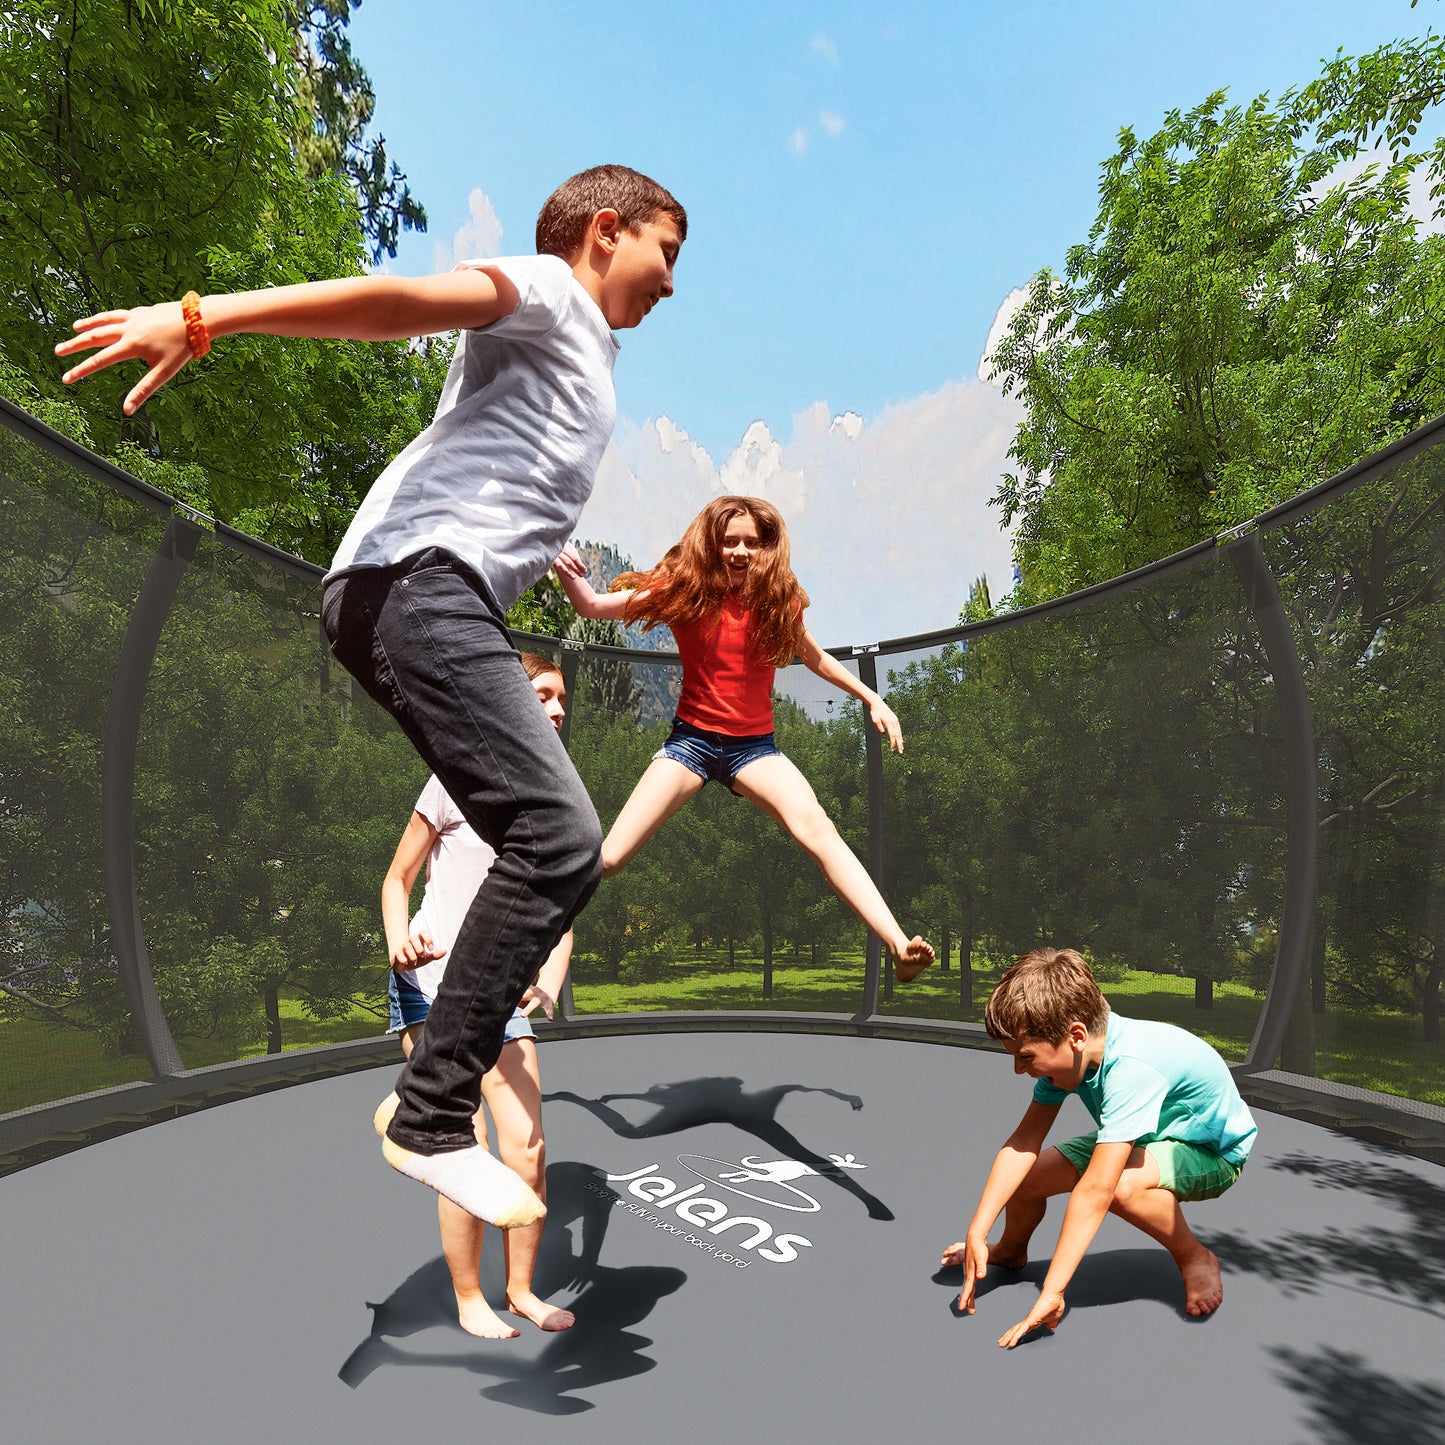 JELENS Trampoline 12FT 14FT, Recreational Trampolines with Enclosure Net and Ladder, Outdoor Anti-Rust Trampolines for Kids and Adults, ASTM Approved